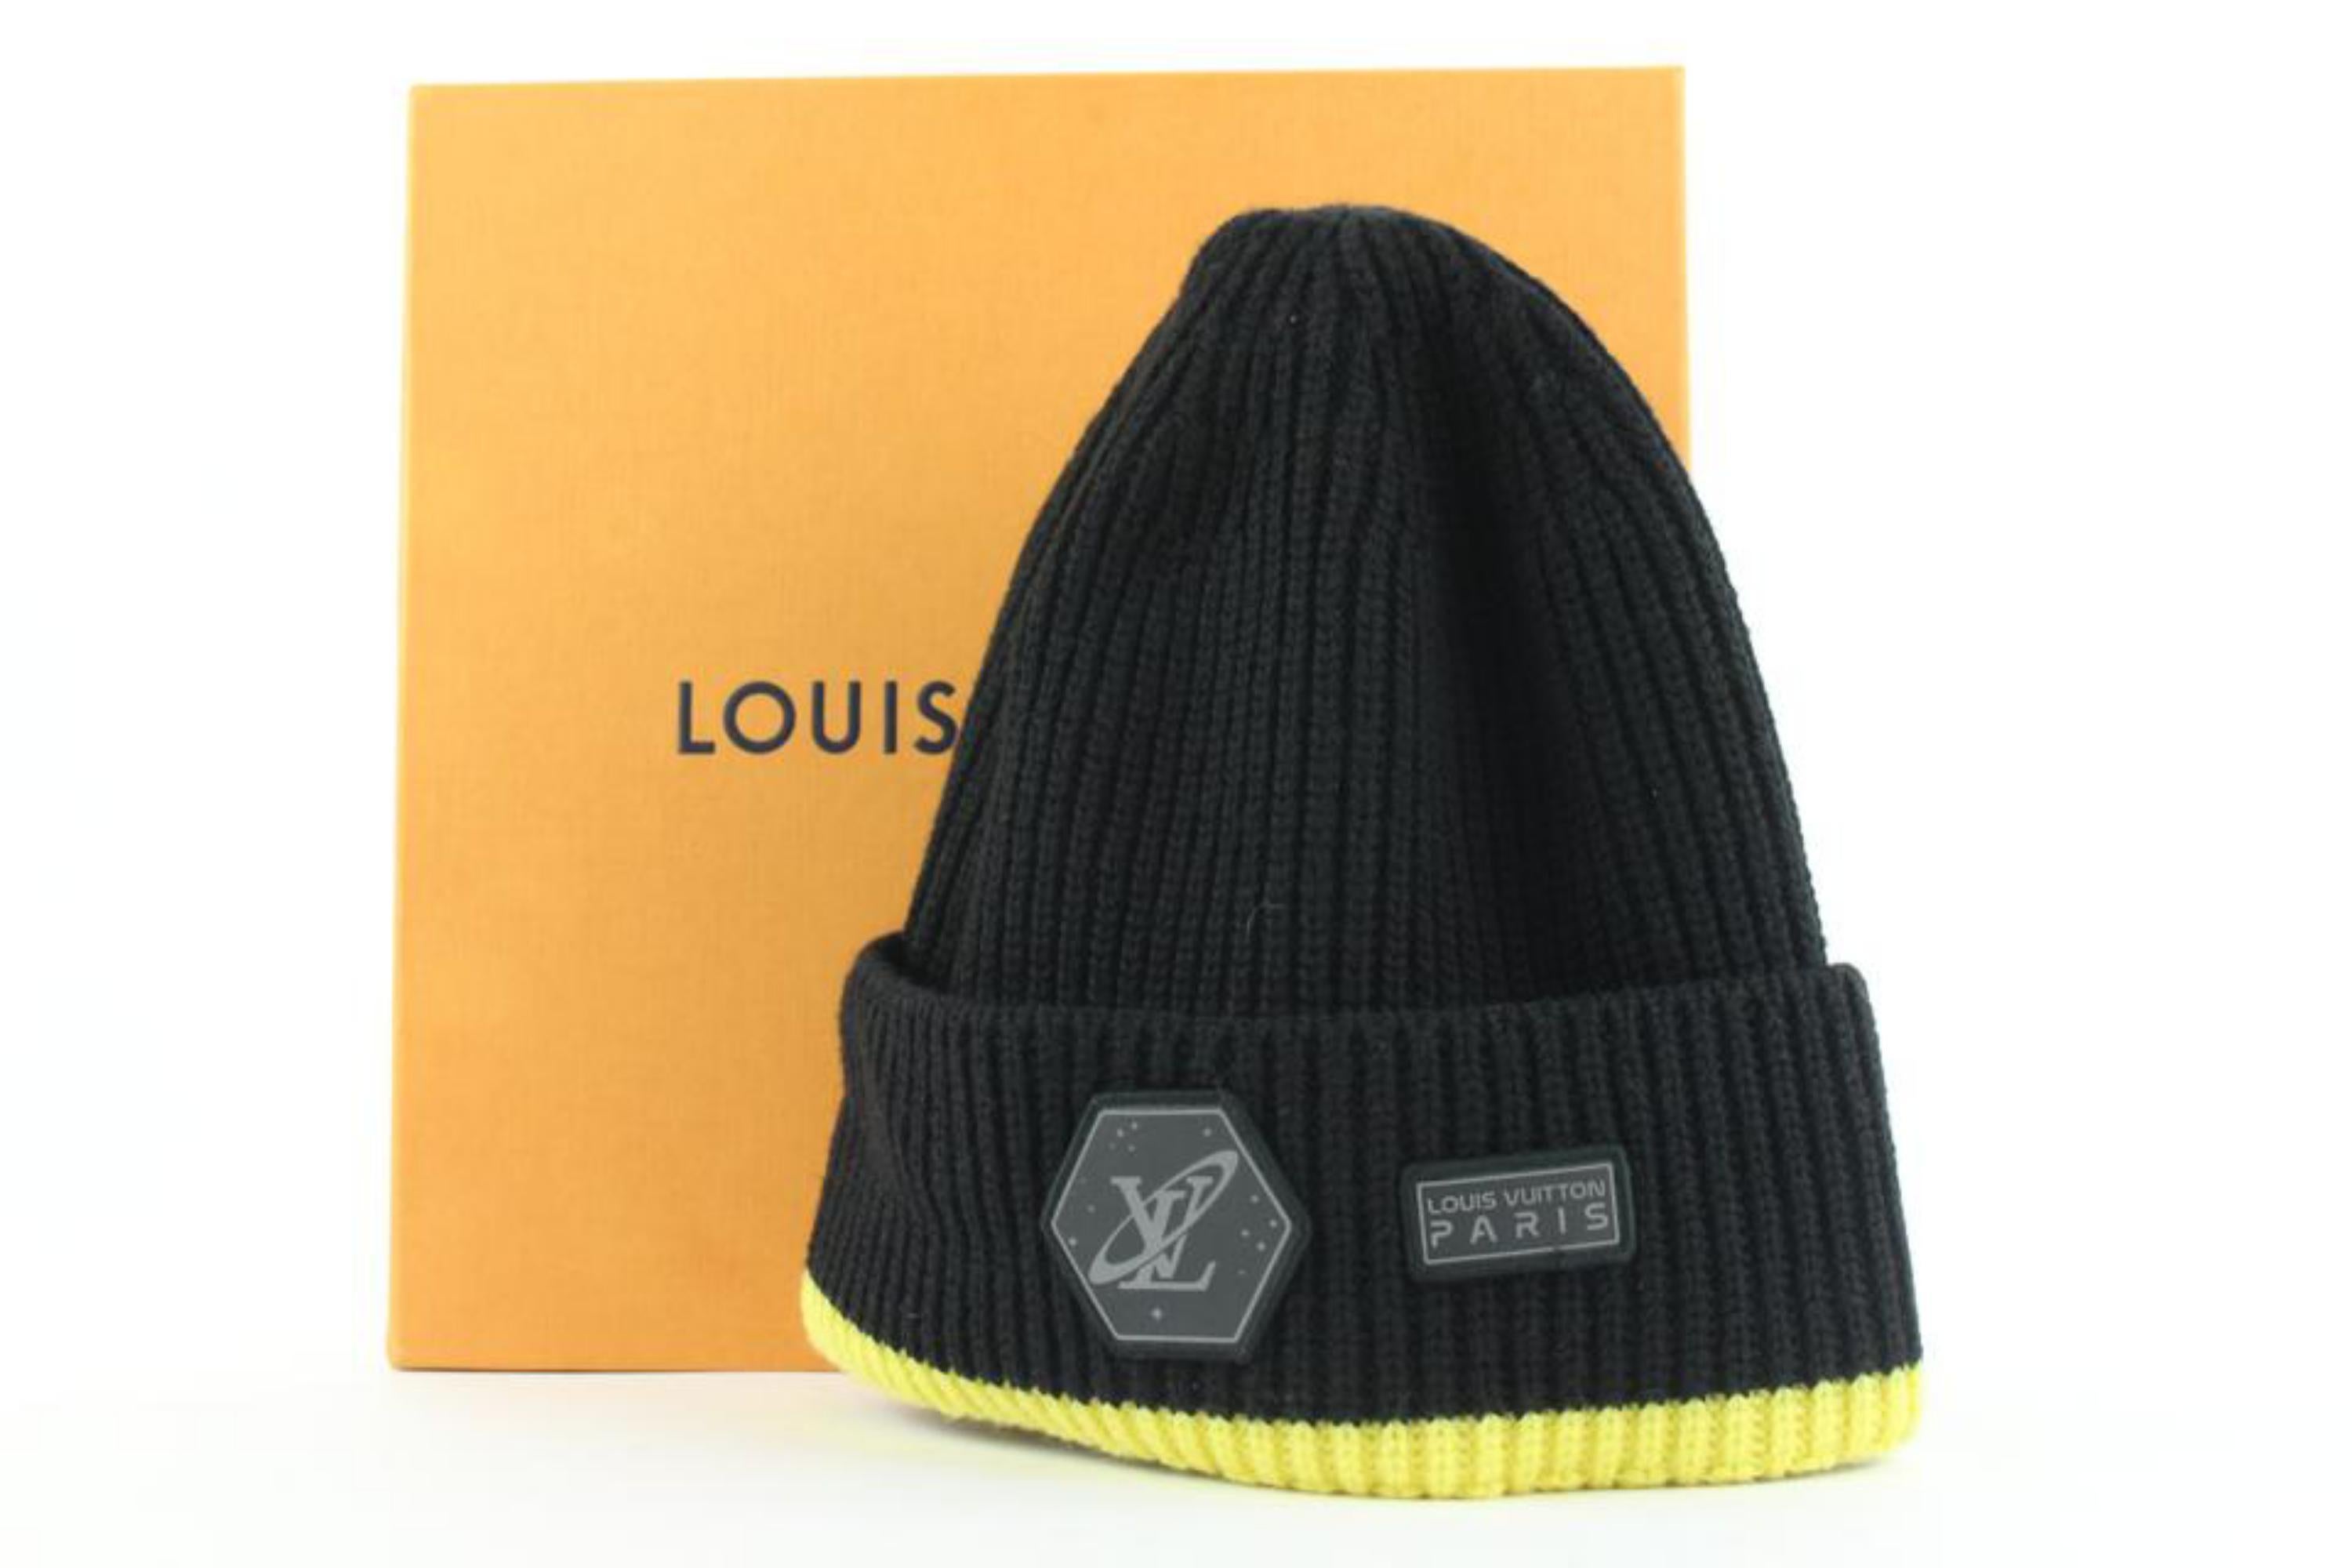 How To Tell If A Louis Vuitton Beanie Is Fake